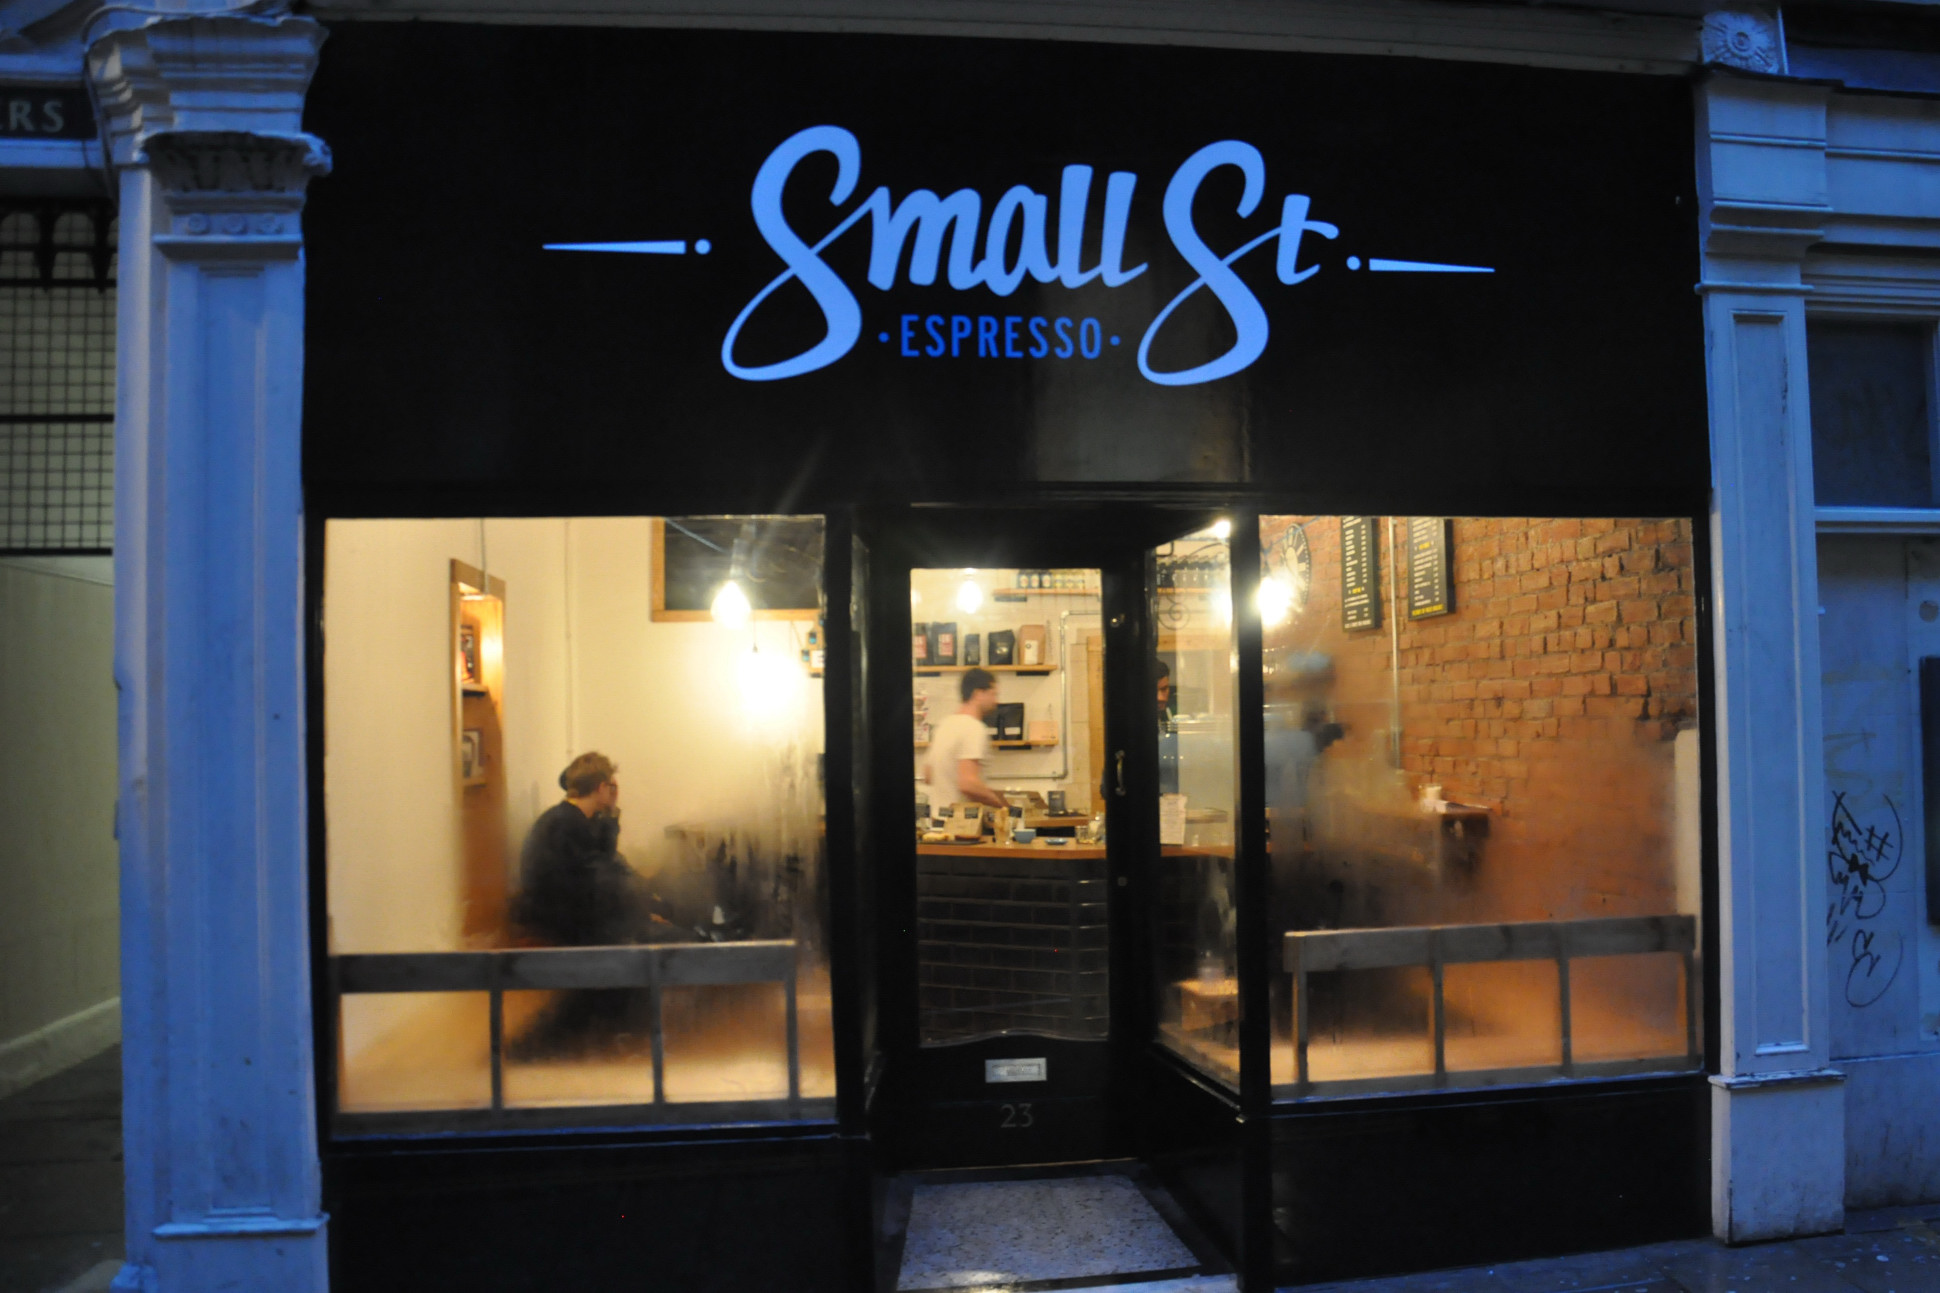 The exterior view of Small St Espresso on a rainy December day in Bristol